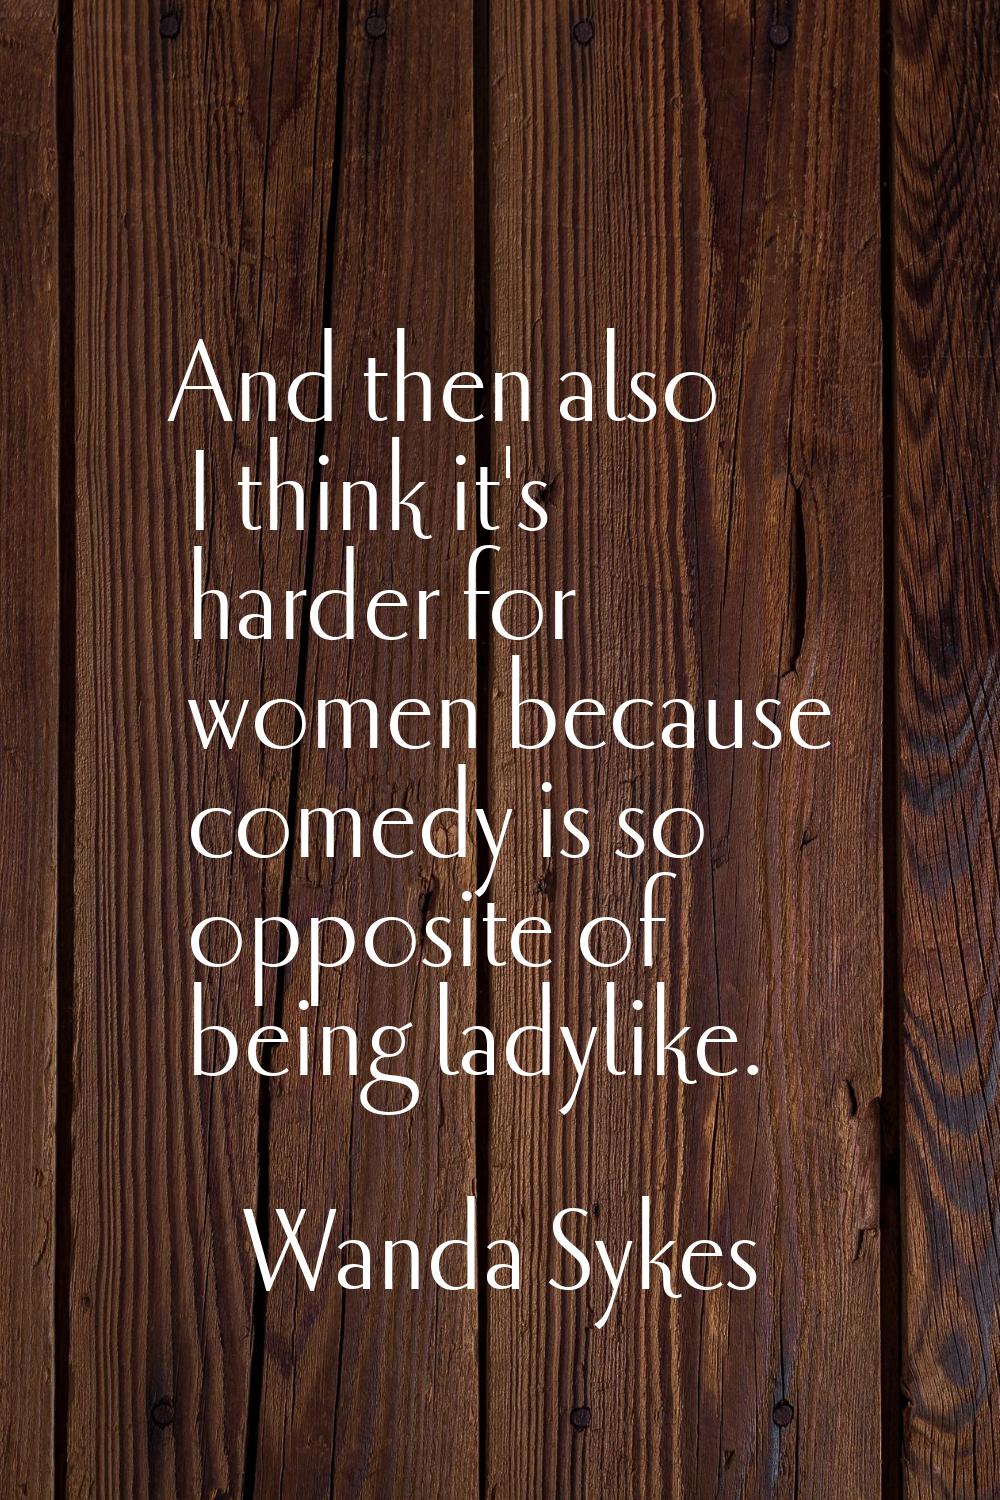 And then also I think it's harder for women because comedy is so opposite of being ladylike.